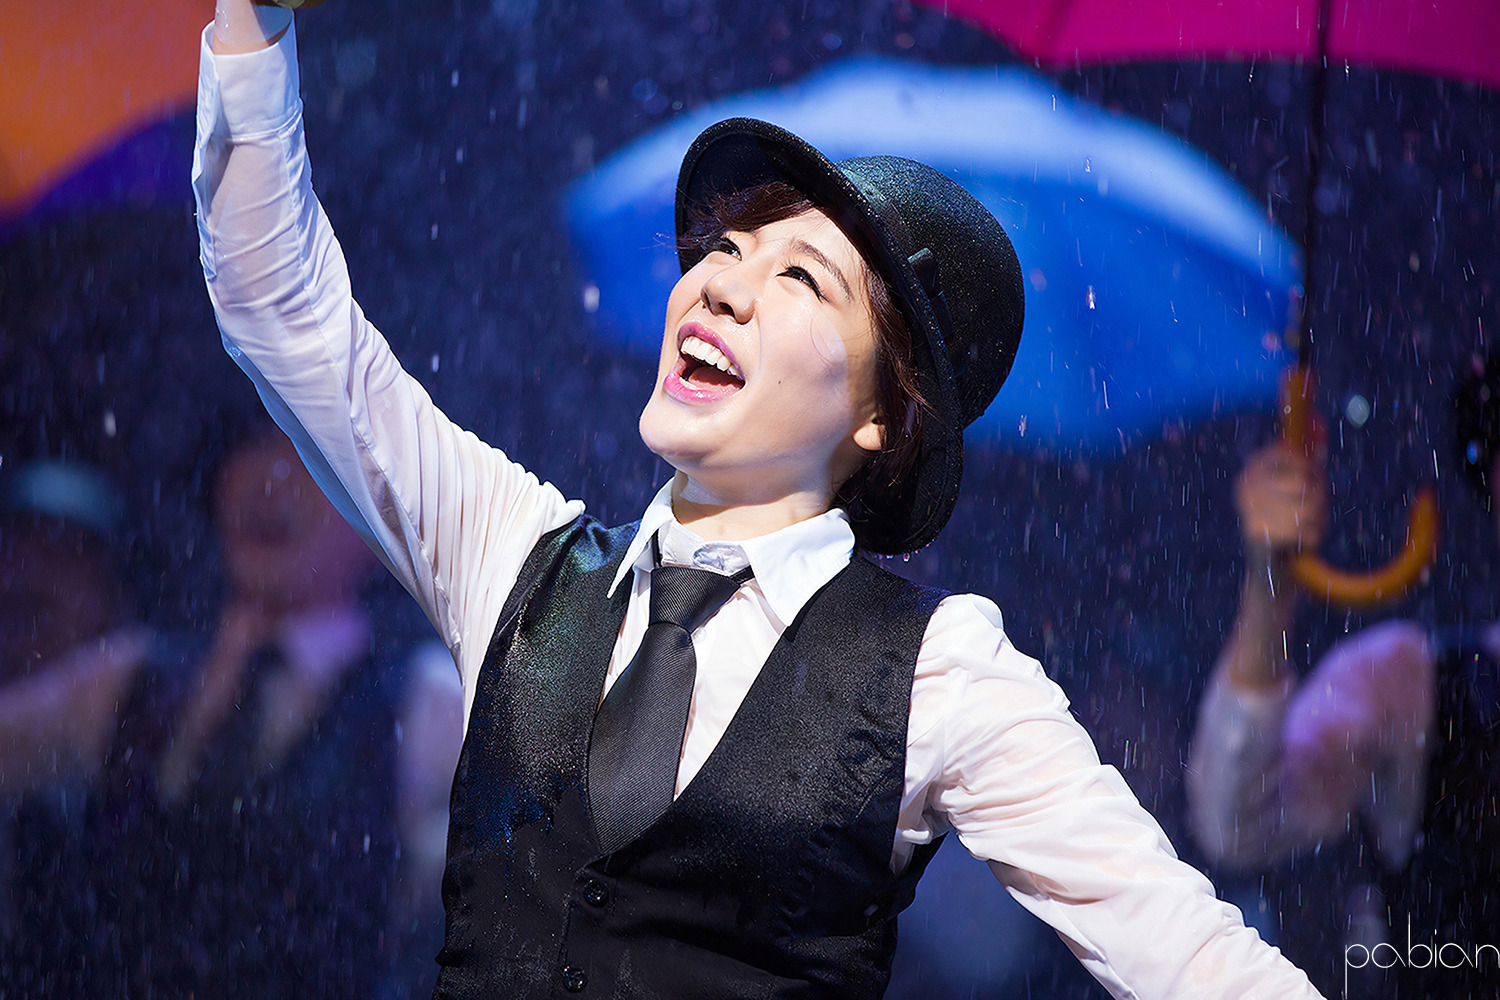 [OTHER][29-04-2014]Sunny sẽ tham gia vở nhạc kịch "SINGIN' IN THE RAIN" - Page 2 236A1A47539E71550112ED